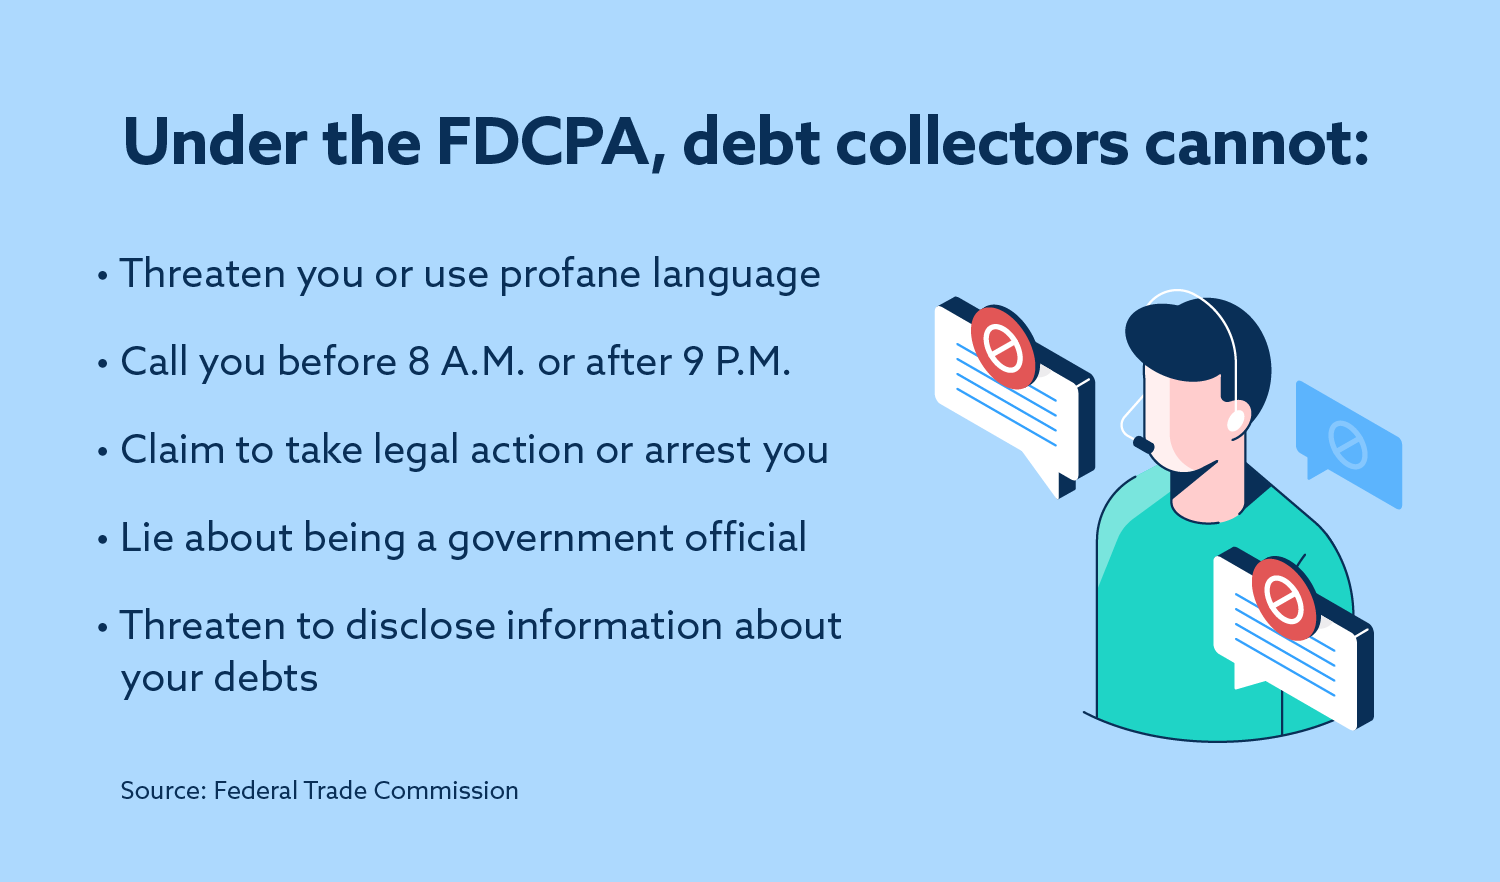 Why Are Political Groups Pretending to Be Debt Collectors?